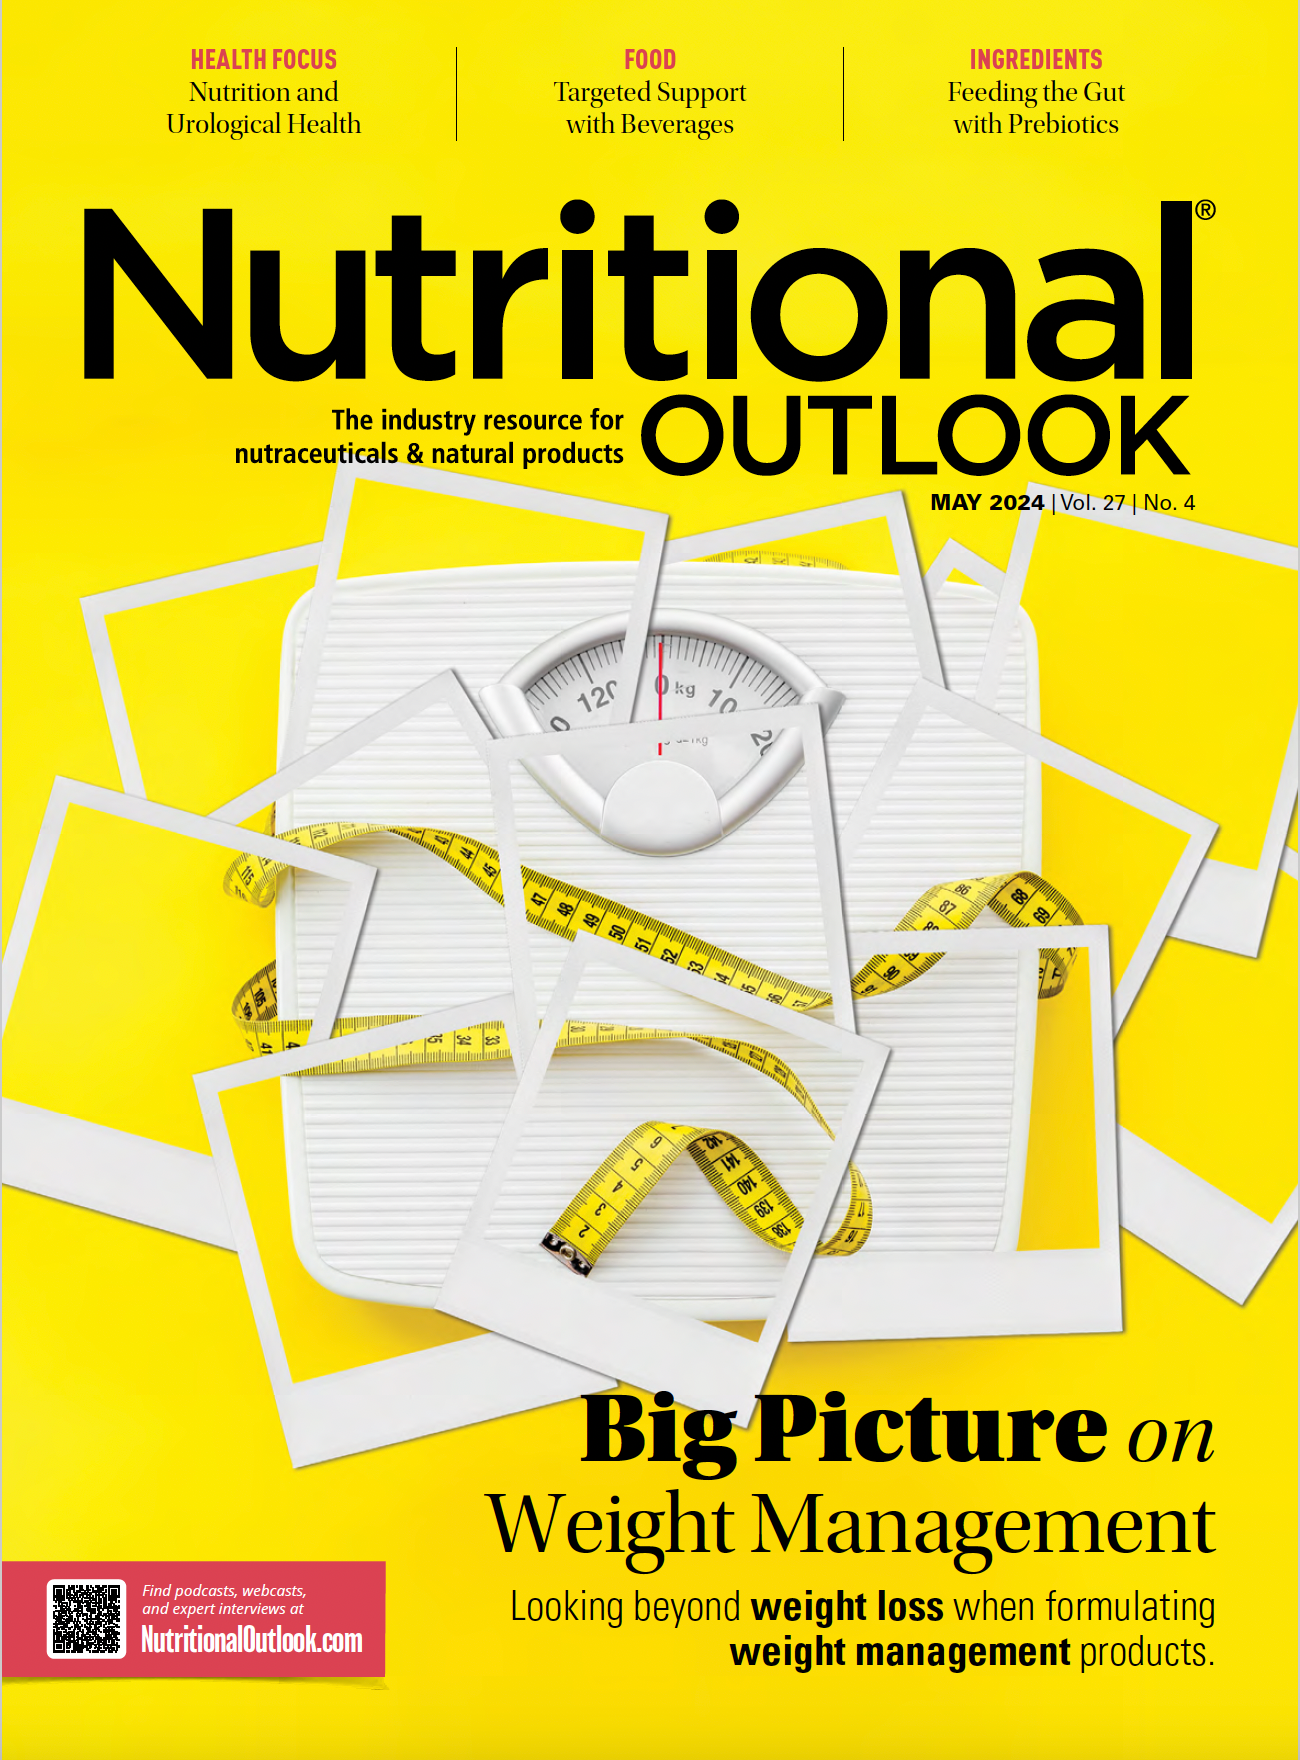 Nutritional Outlook Vol. 27 No. 4